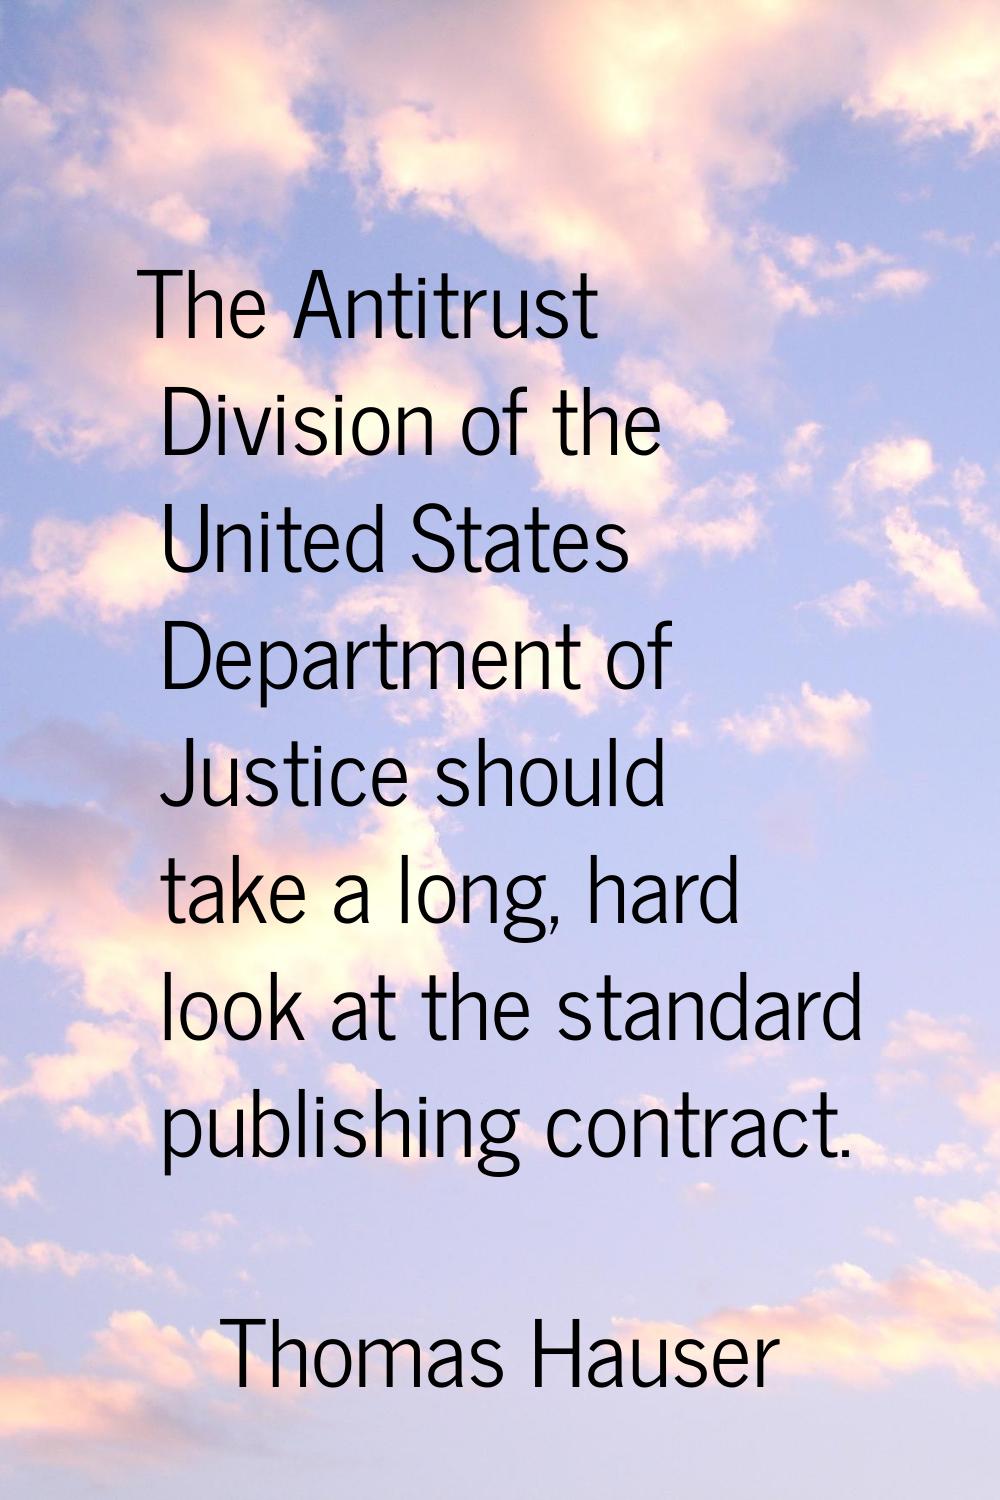 The Antitrust Division of the United States Department of Justice should take a long, hard look at 